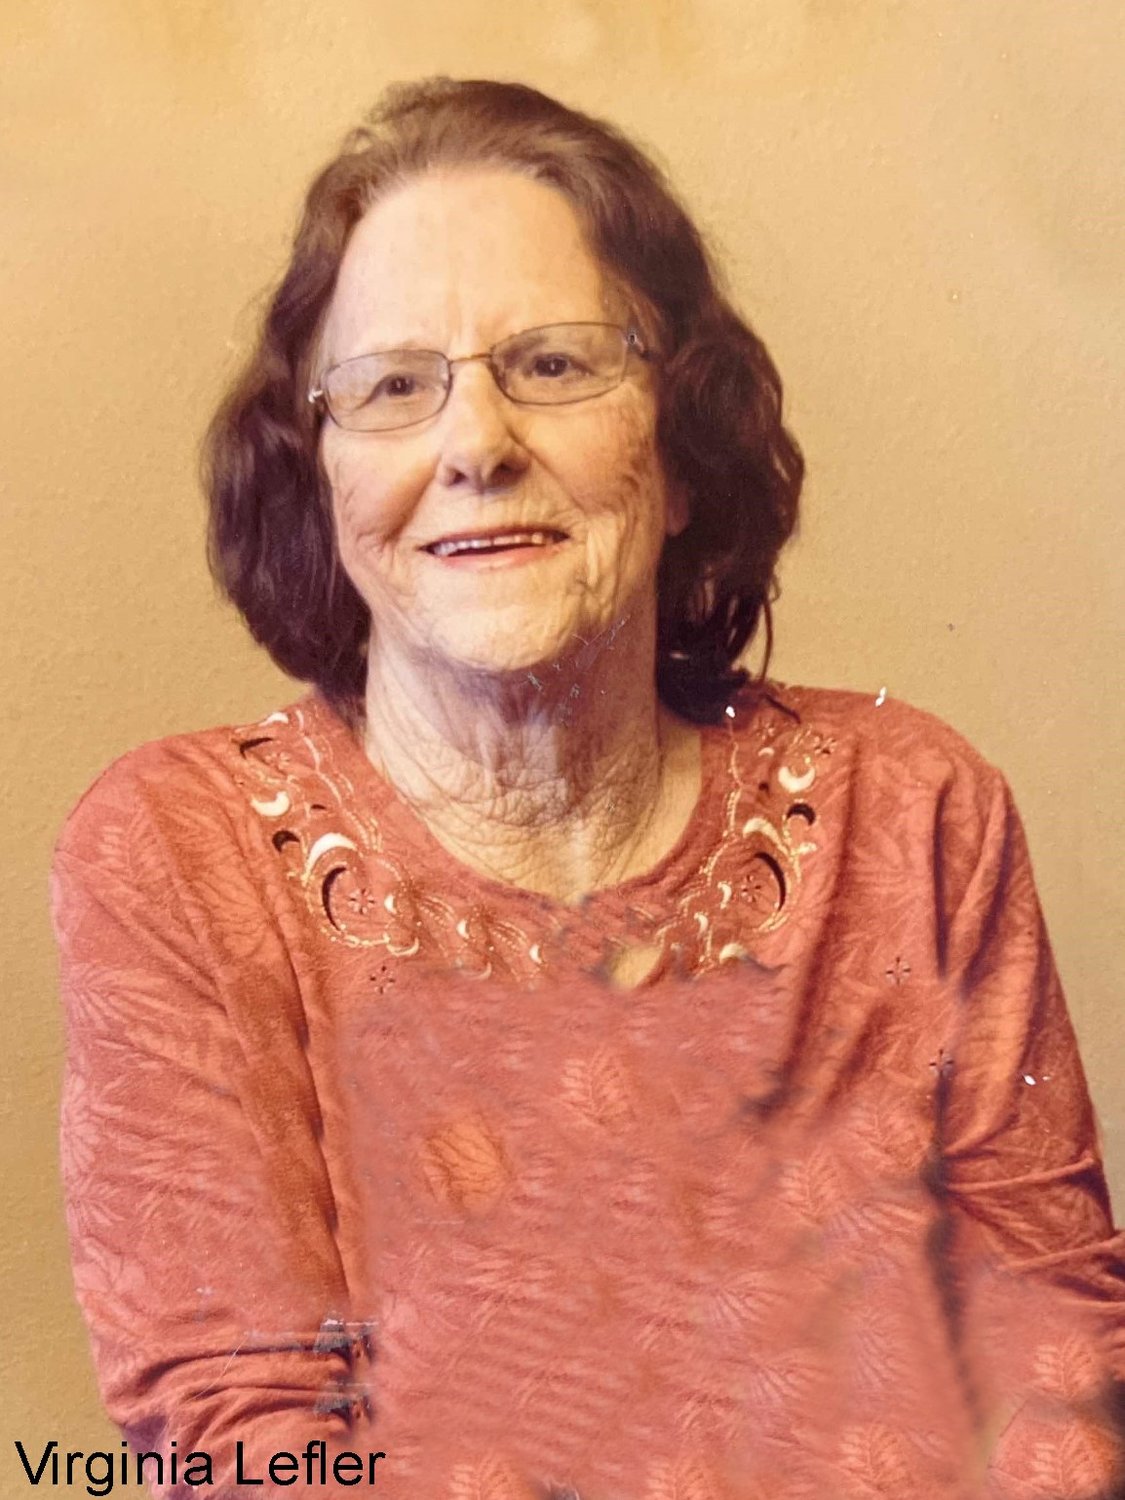 Virginia “Ginger” Arrowood Lefler, 86, of Montrose, IA died Wednesday, August 17, 2022 at her home.